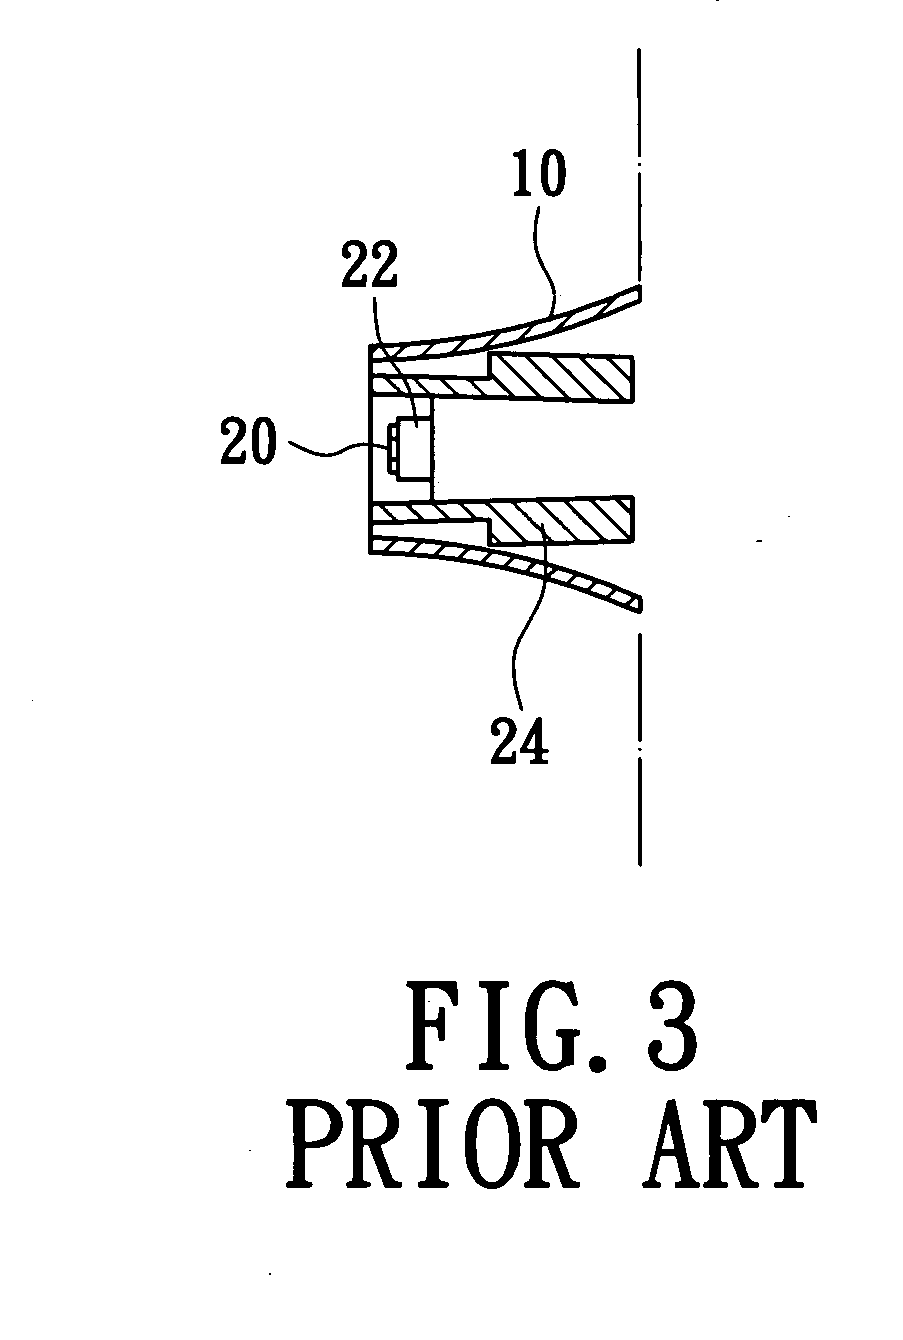 Probe structure for an ear thermometer